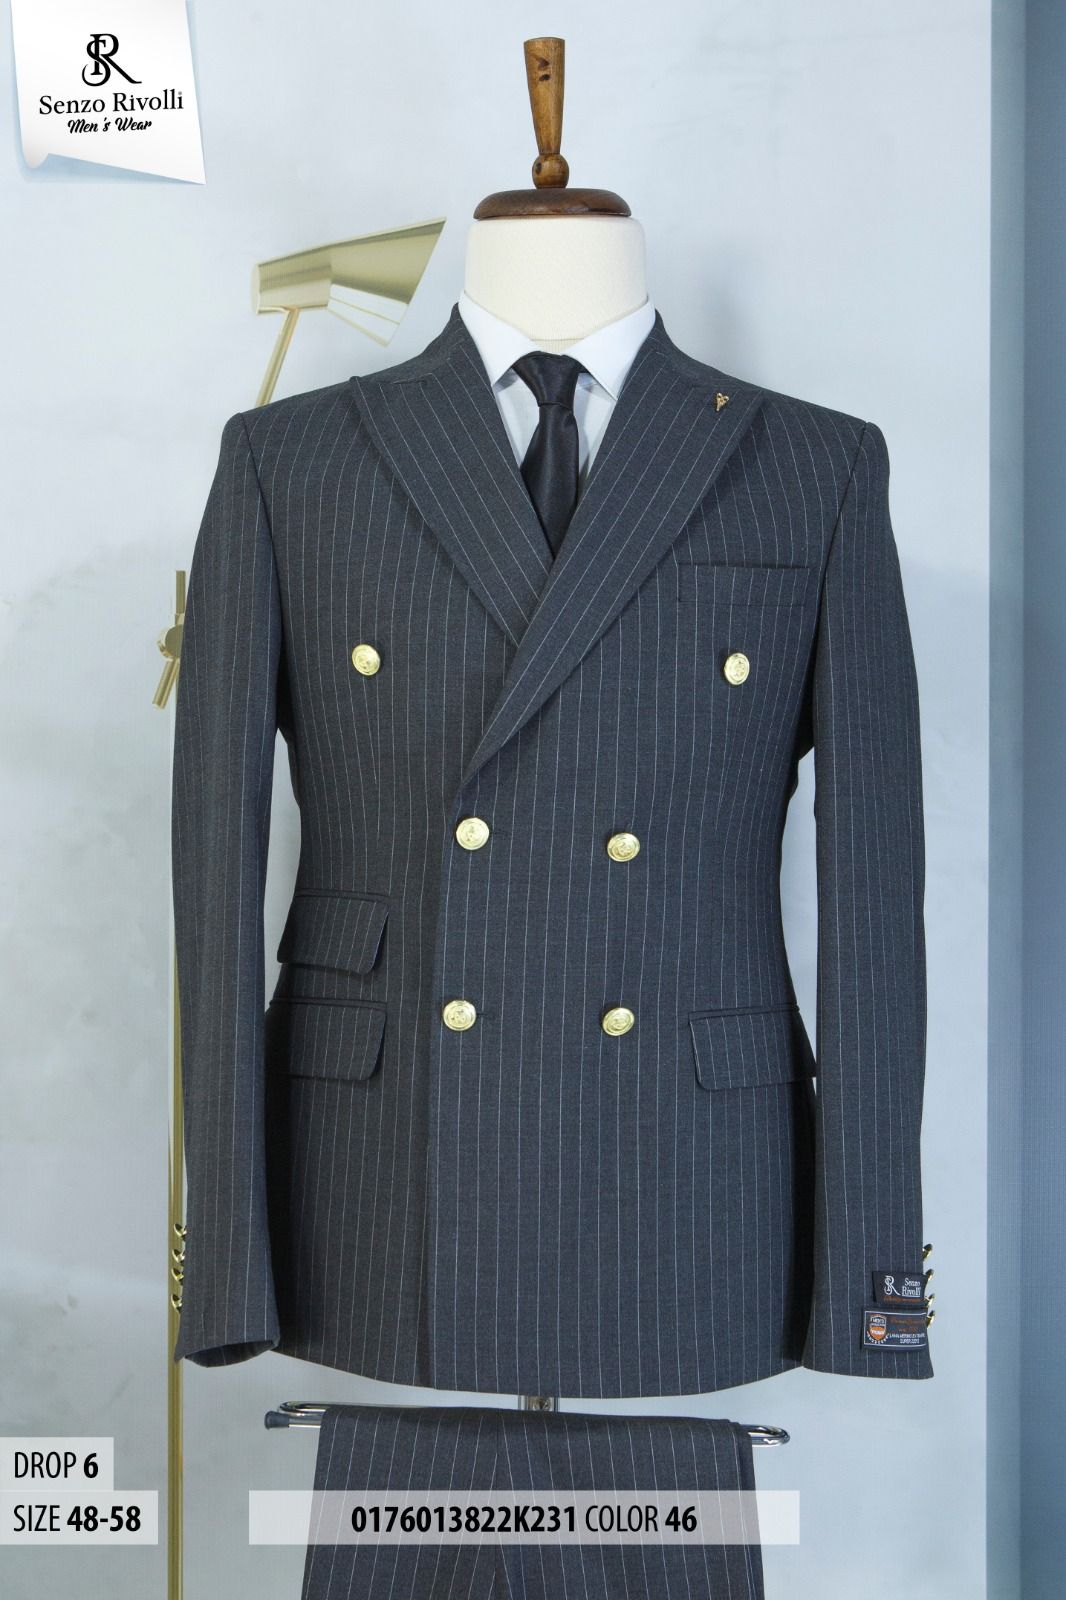 EXECUTIVE LIGHT GREY STRIPPED BREASTED TURKEY SUIT WITH GOLDEN BUTTON-deluxe.com.ng